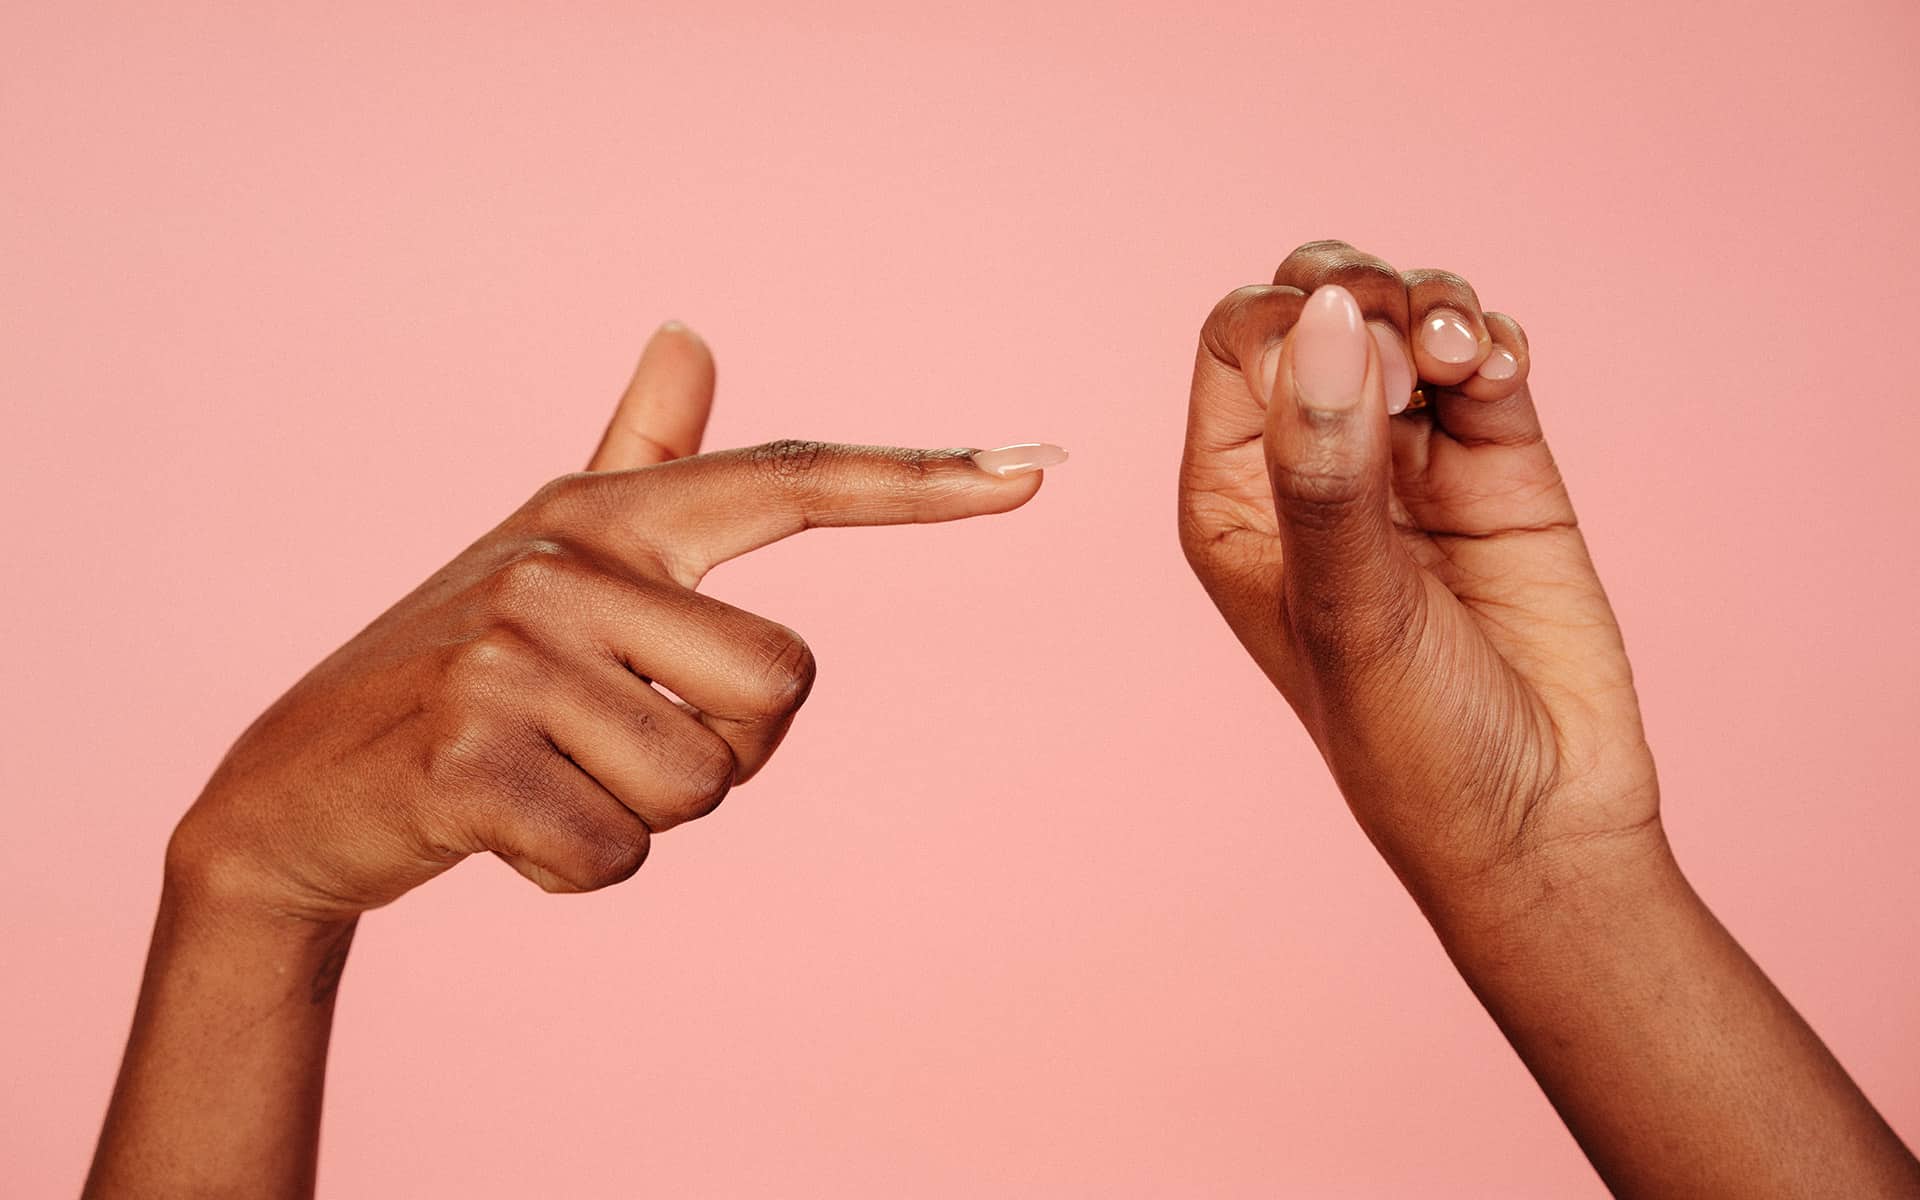 A finger pointing to a hole, to simulate a vagina or intercourse